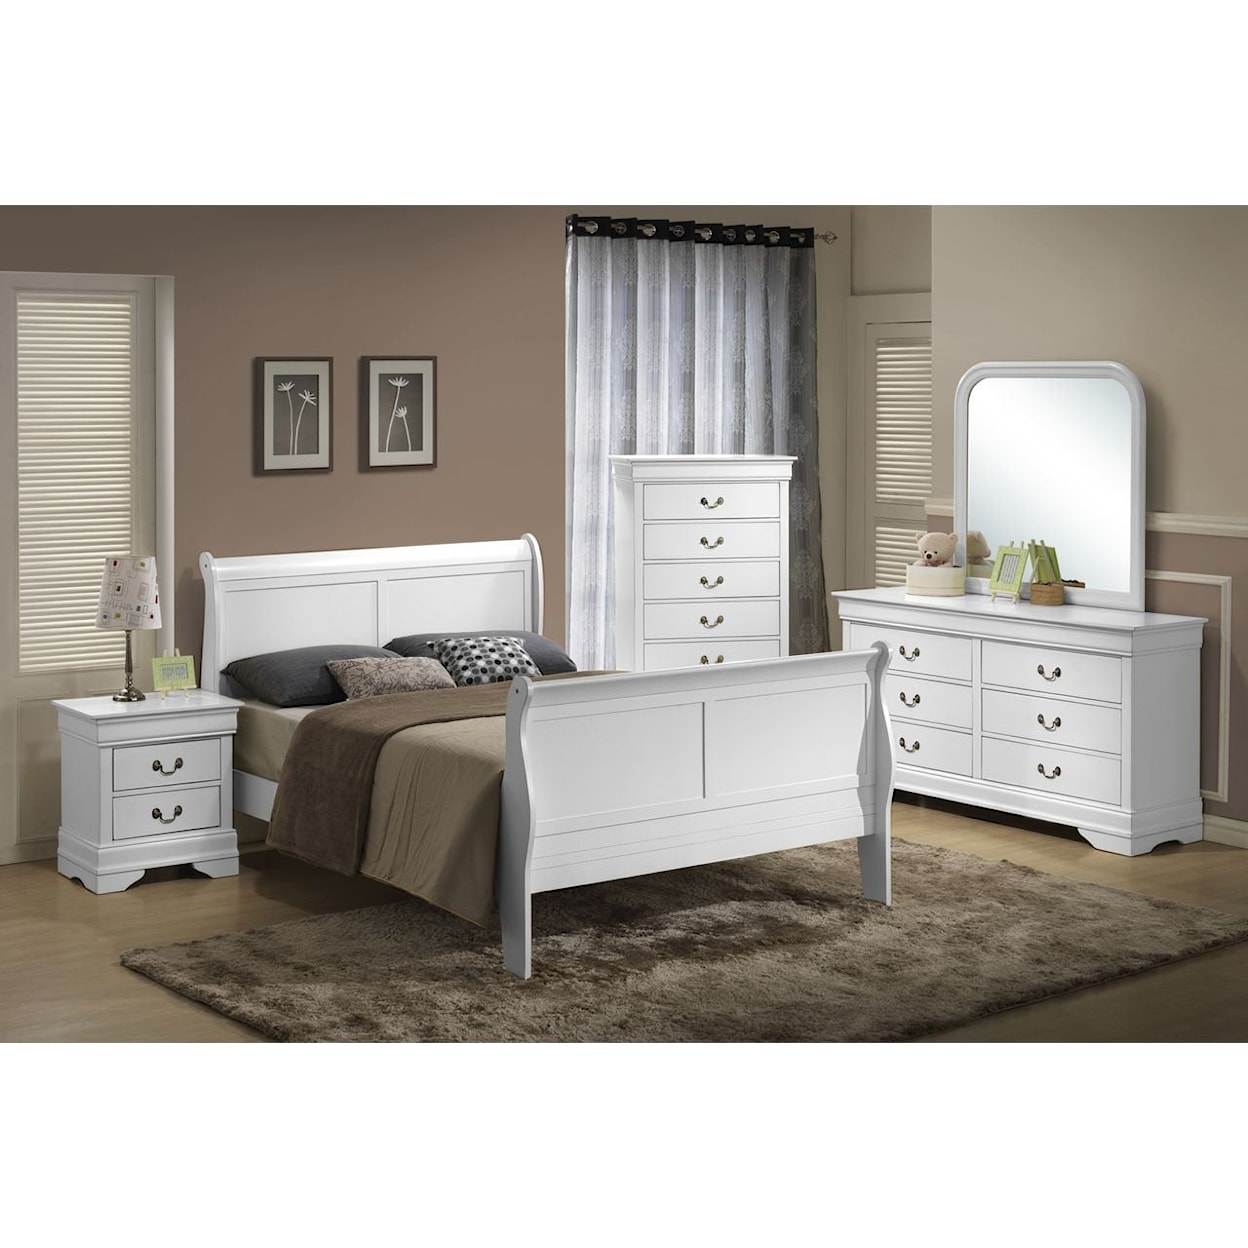 Lifestyle C4936A 5 Piece Queen Bedroom Set with Chest